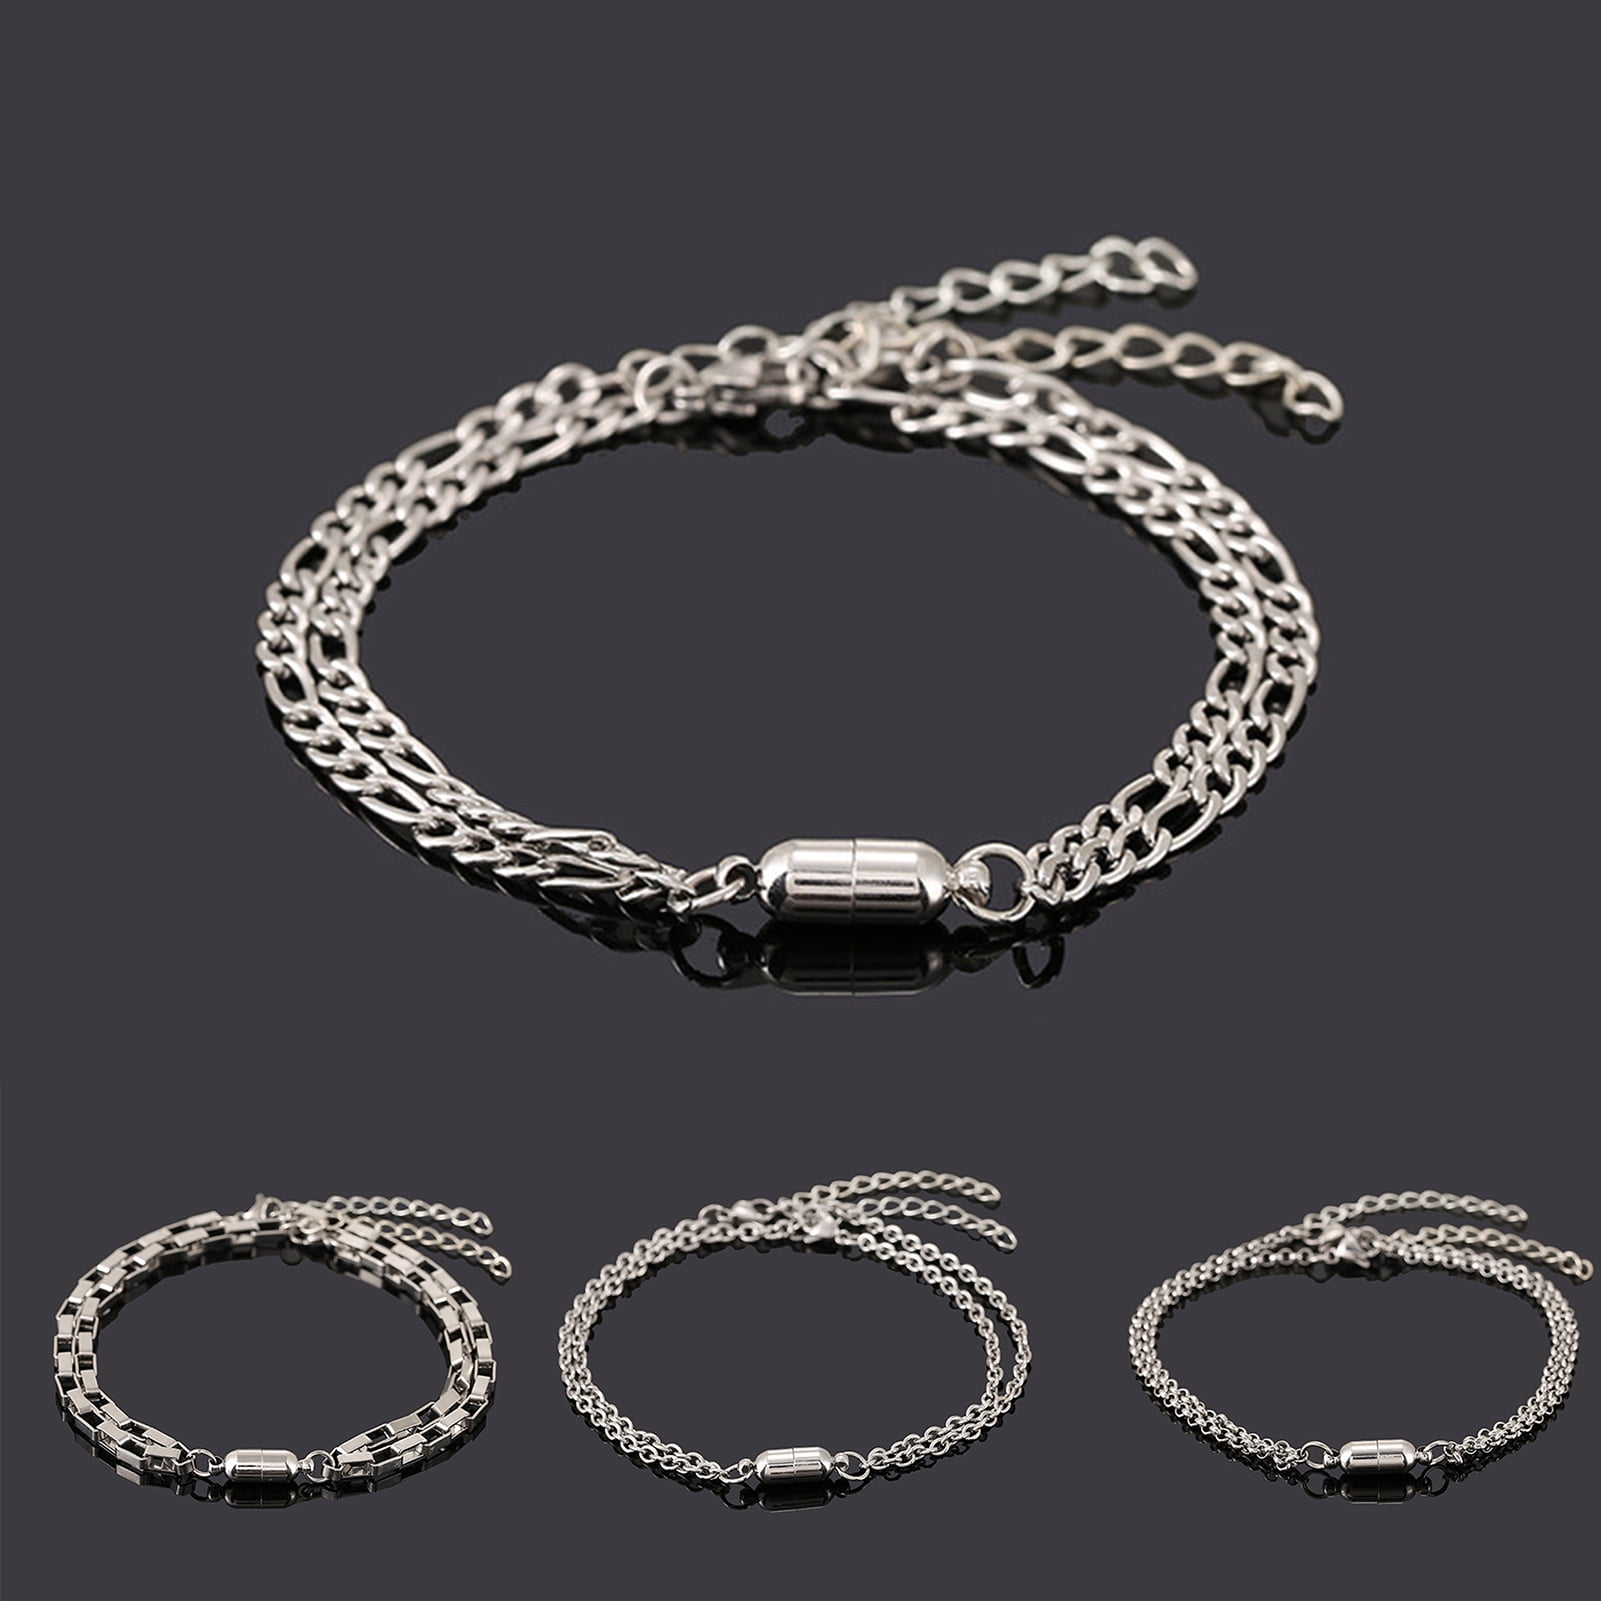 gift idea for the partner with gift box adjustable in length Bracelet with cross in grey-silver fabric bracelet with cross pendant